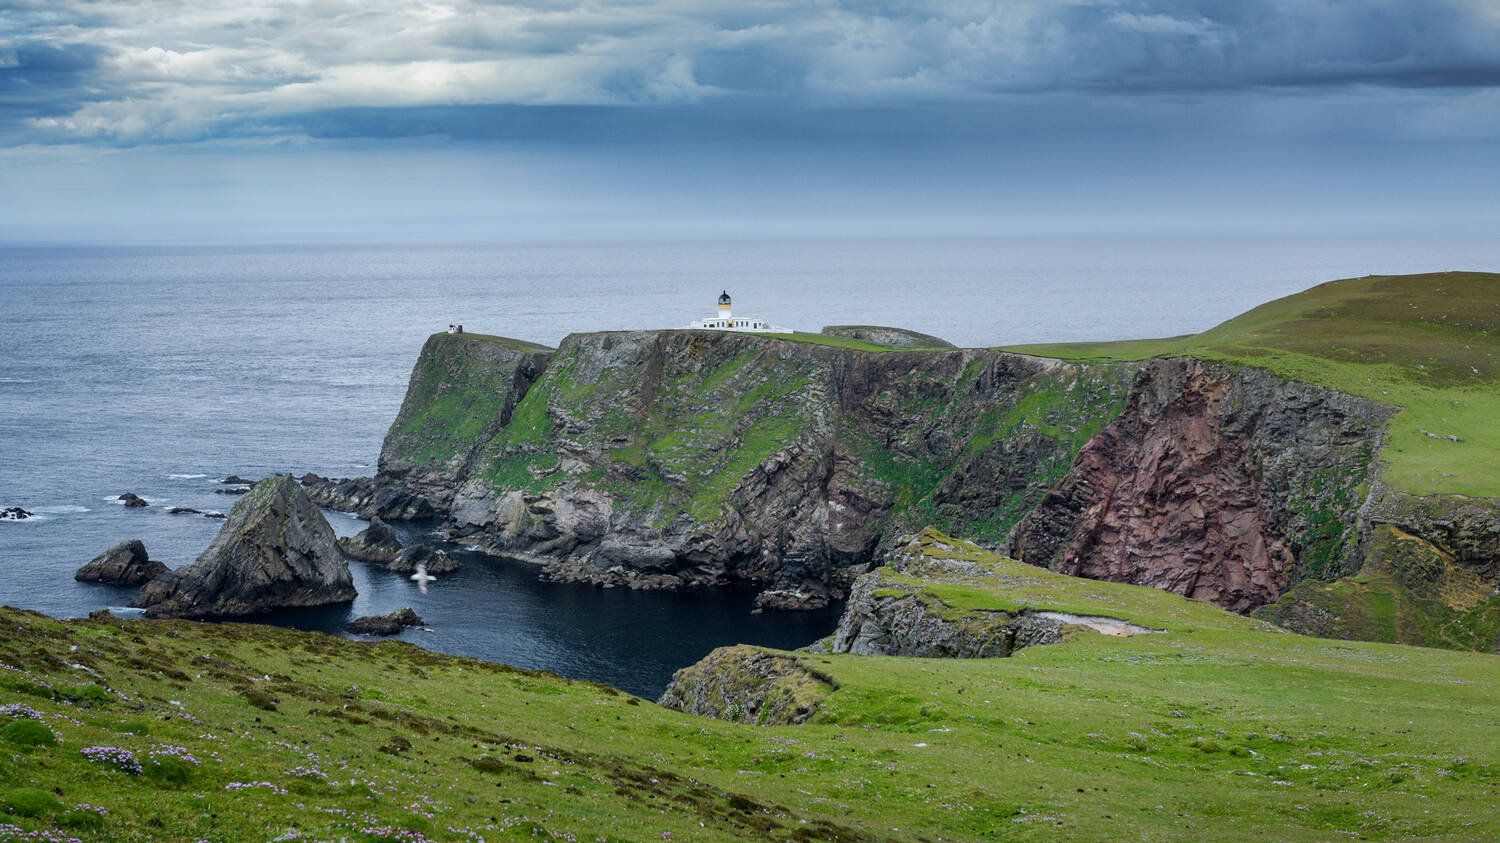 A white lighthouse stands at the edge of green cliffs on a headland. The sky overhead is heavy and grey, with occasional shafts of sunlight shining through.